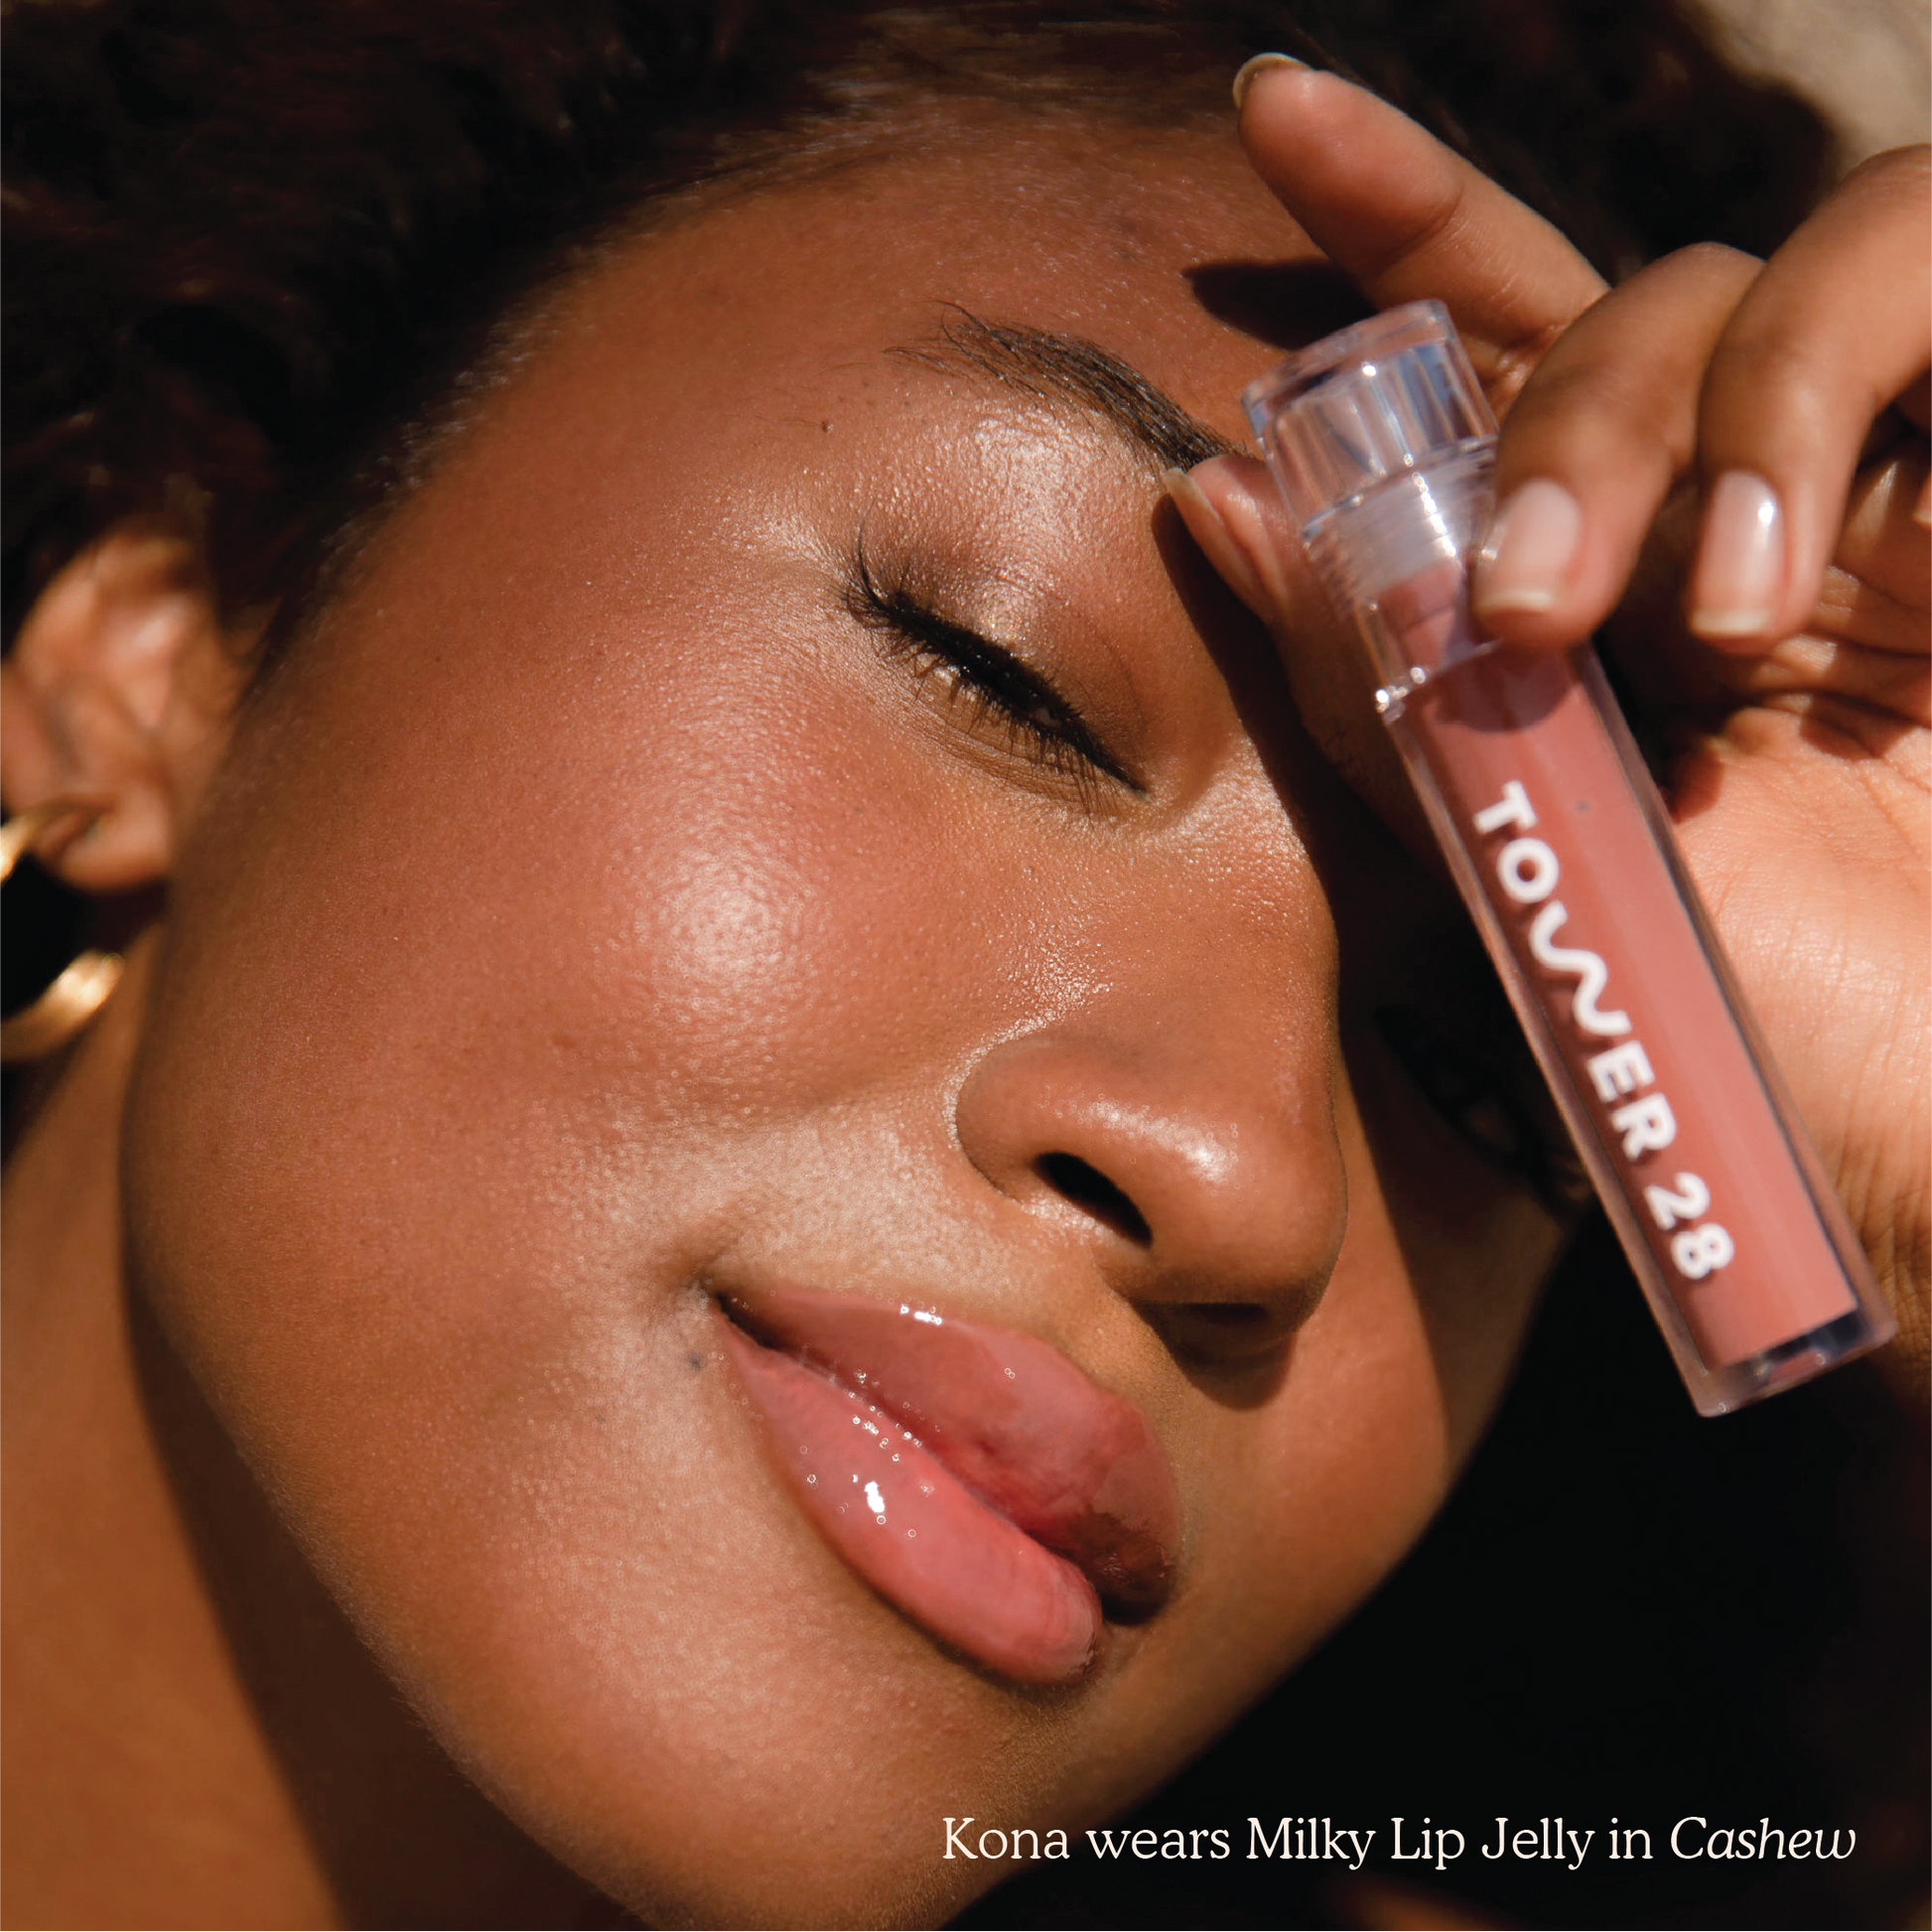 Closeup photo of a girl smiling with very glossy lips, wearing the Tower 28 Beauty ShineOn Milky Lip Jelly shade in Cashew (a milky rosy-brown), and holding an acrylic slim lip gloss tube with "Tower 28" logo over her eye